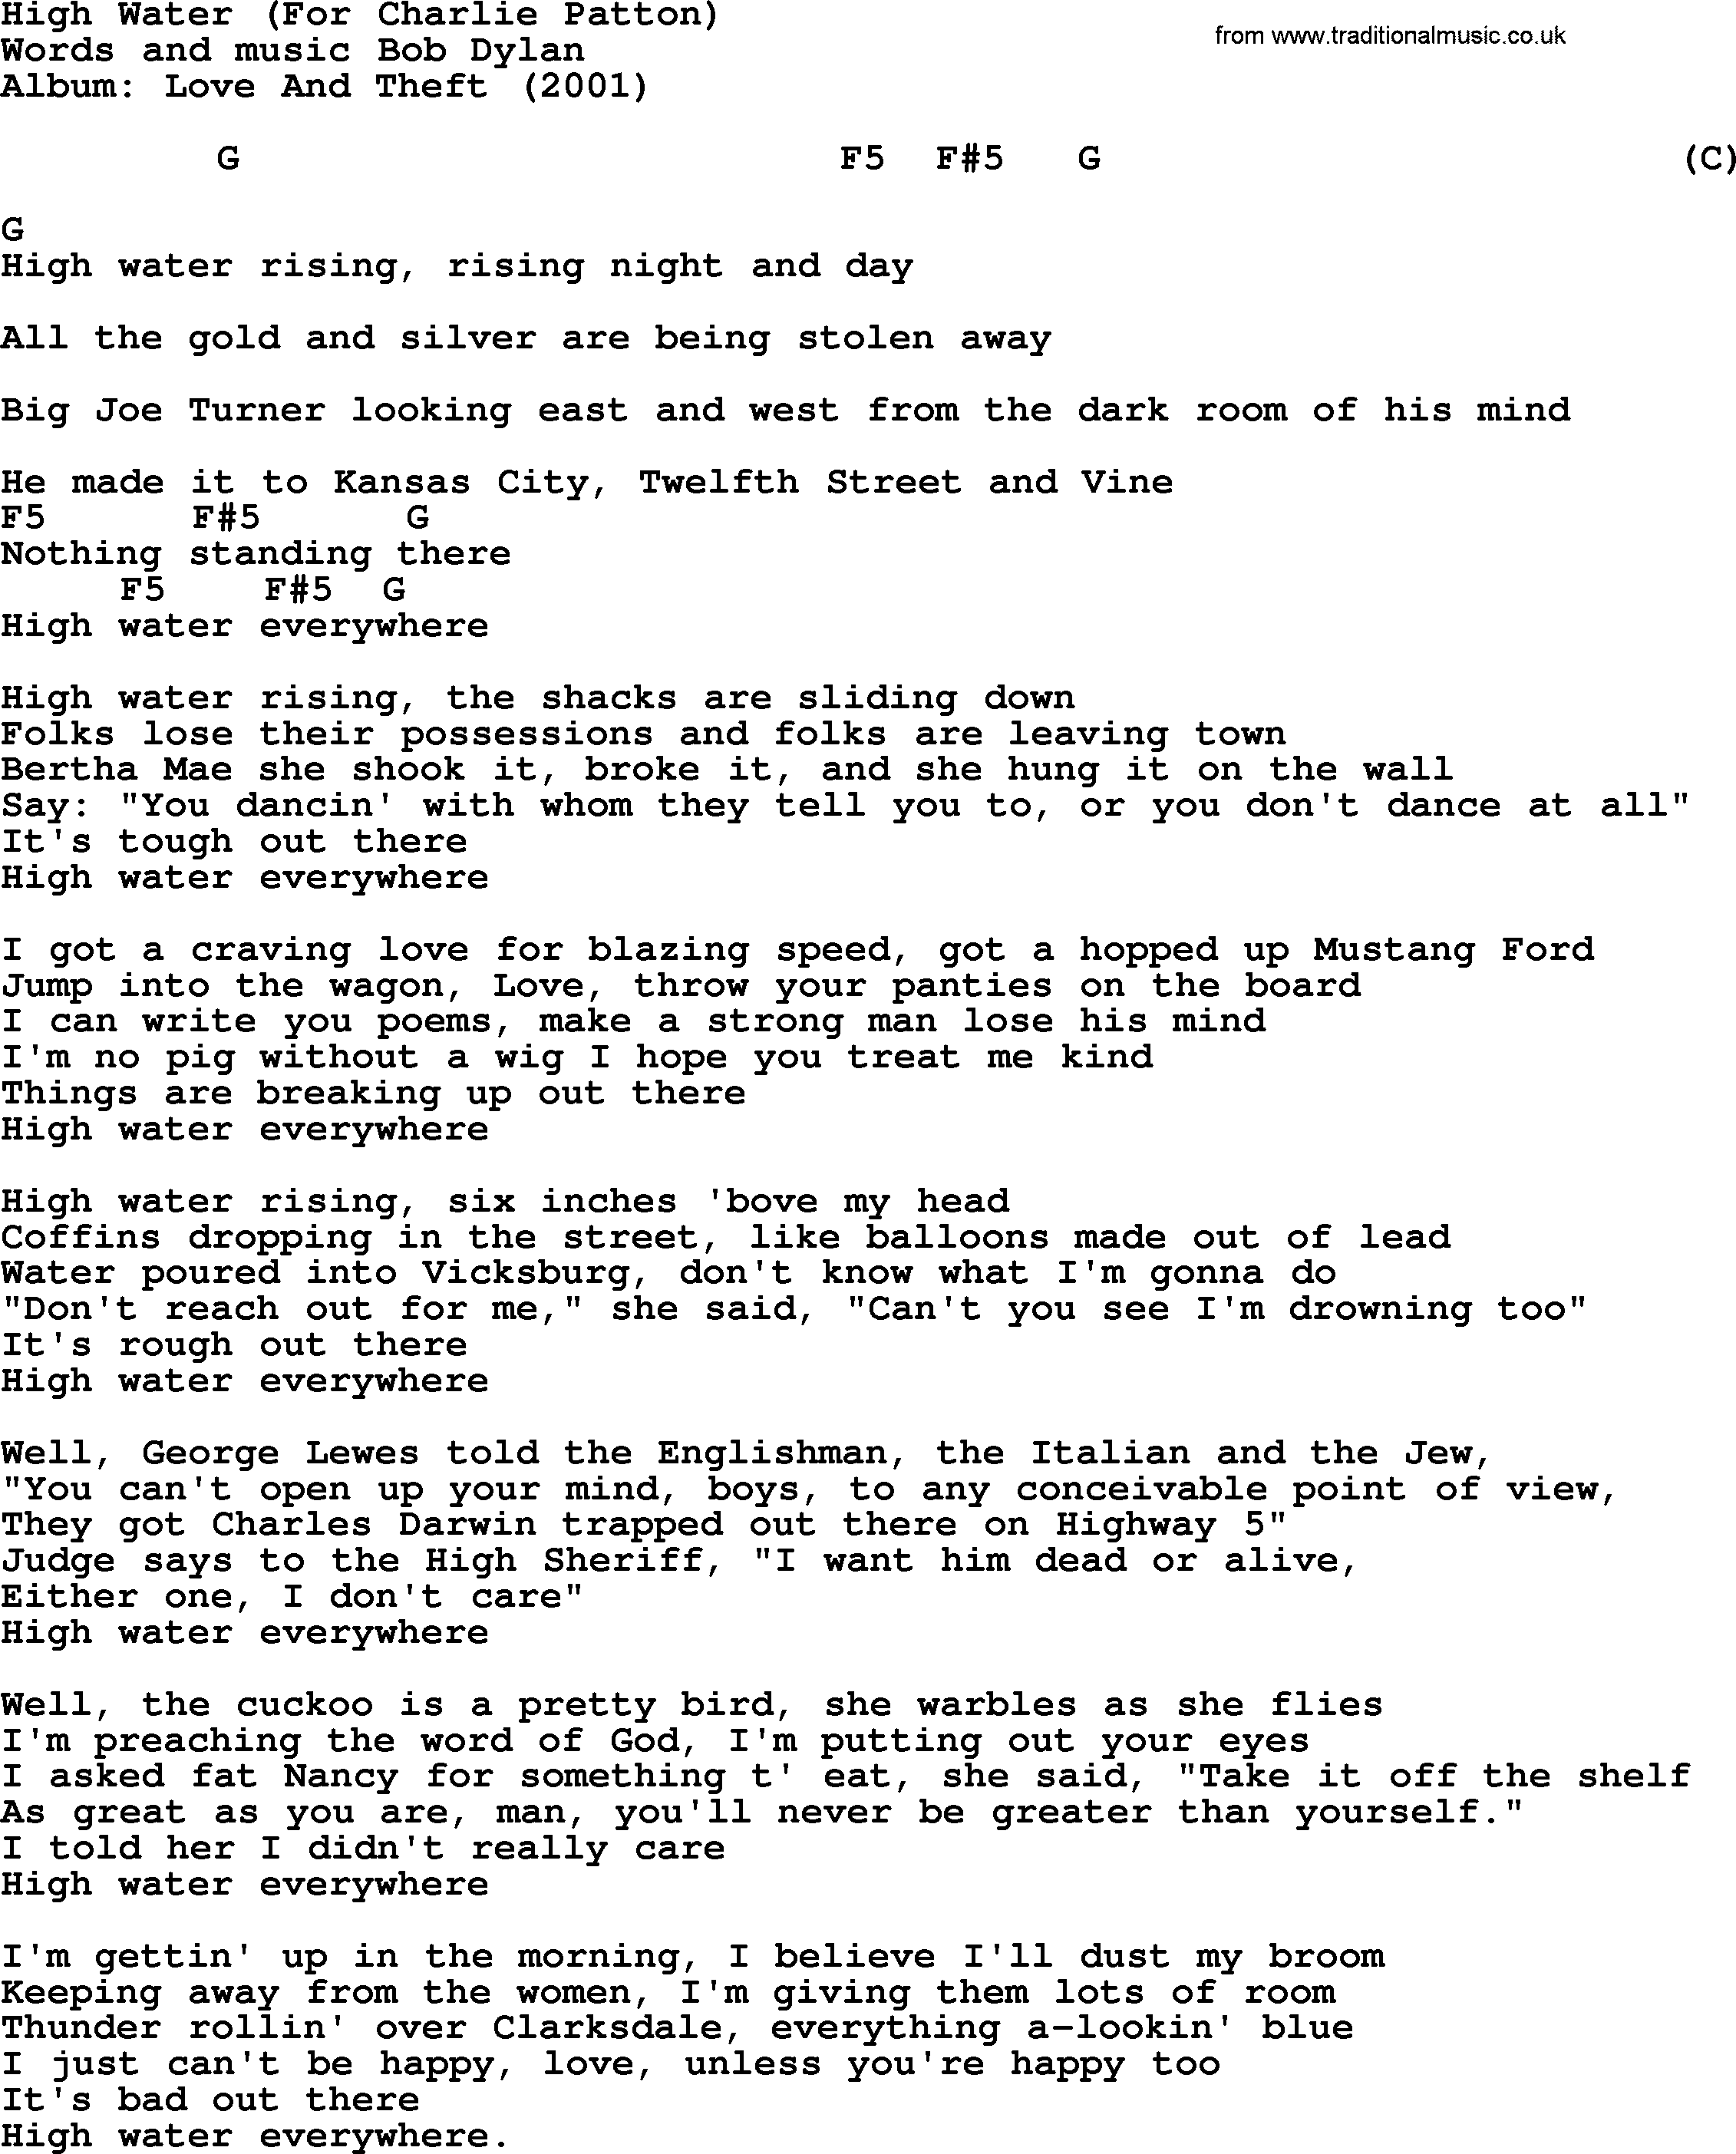 Bob Dylan song, lyrics with chords - High Water (For Charlie Patton)